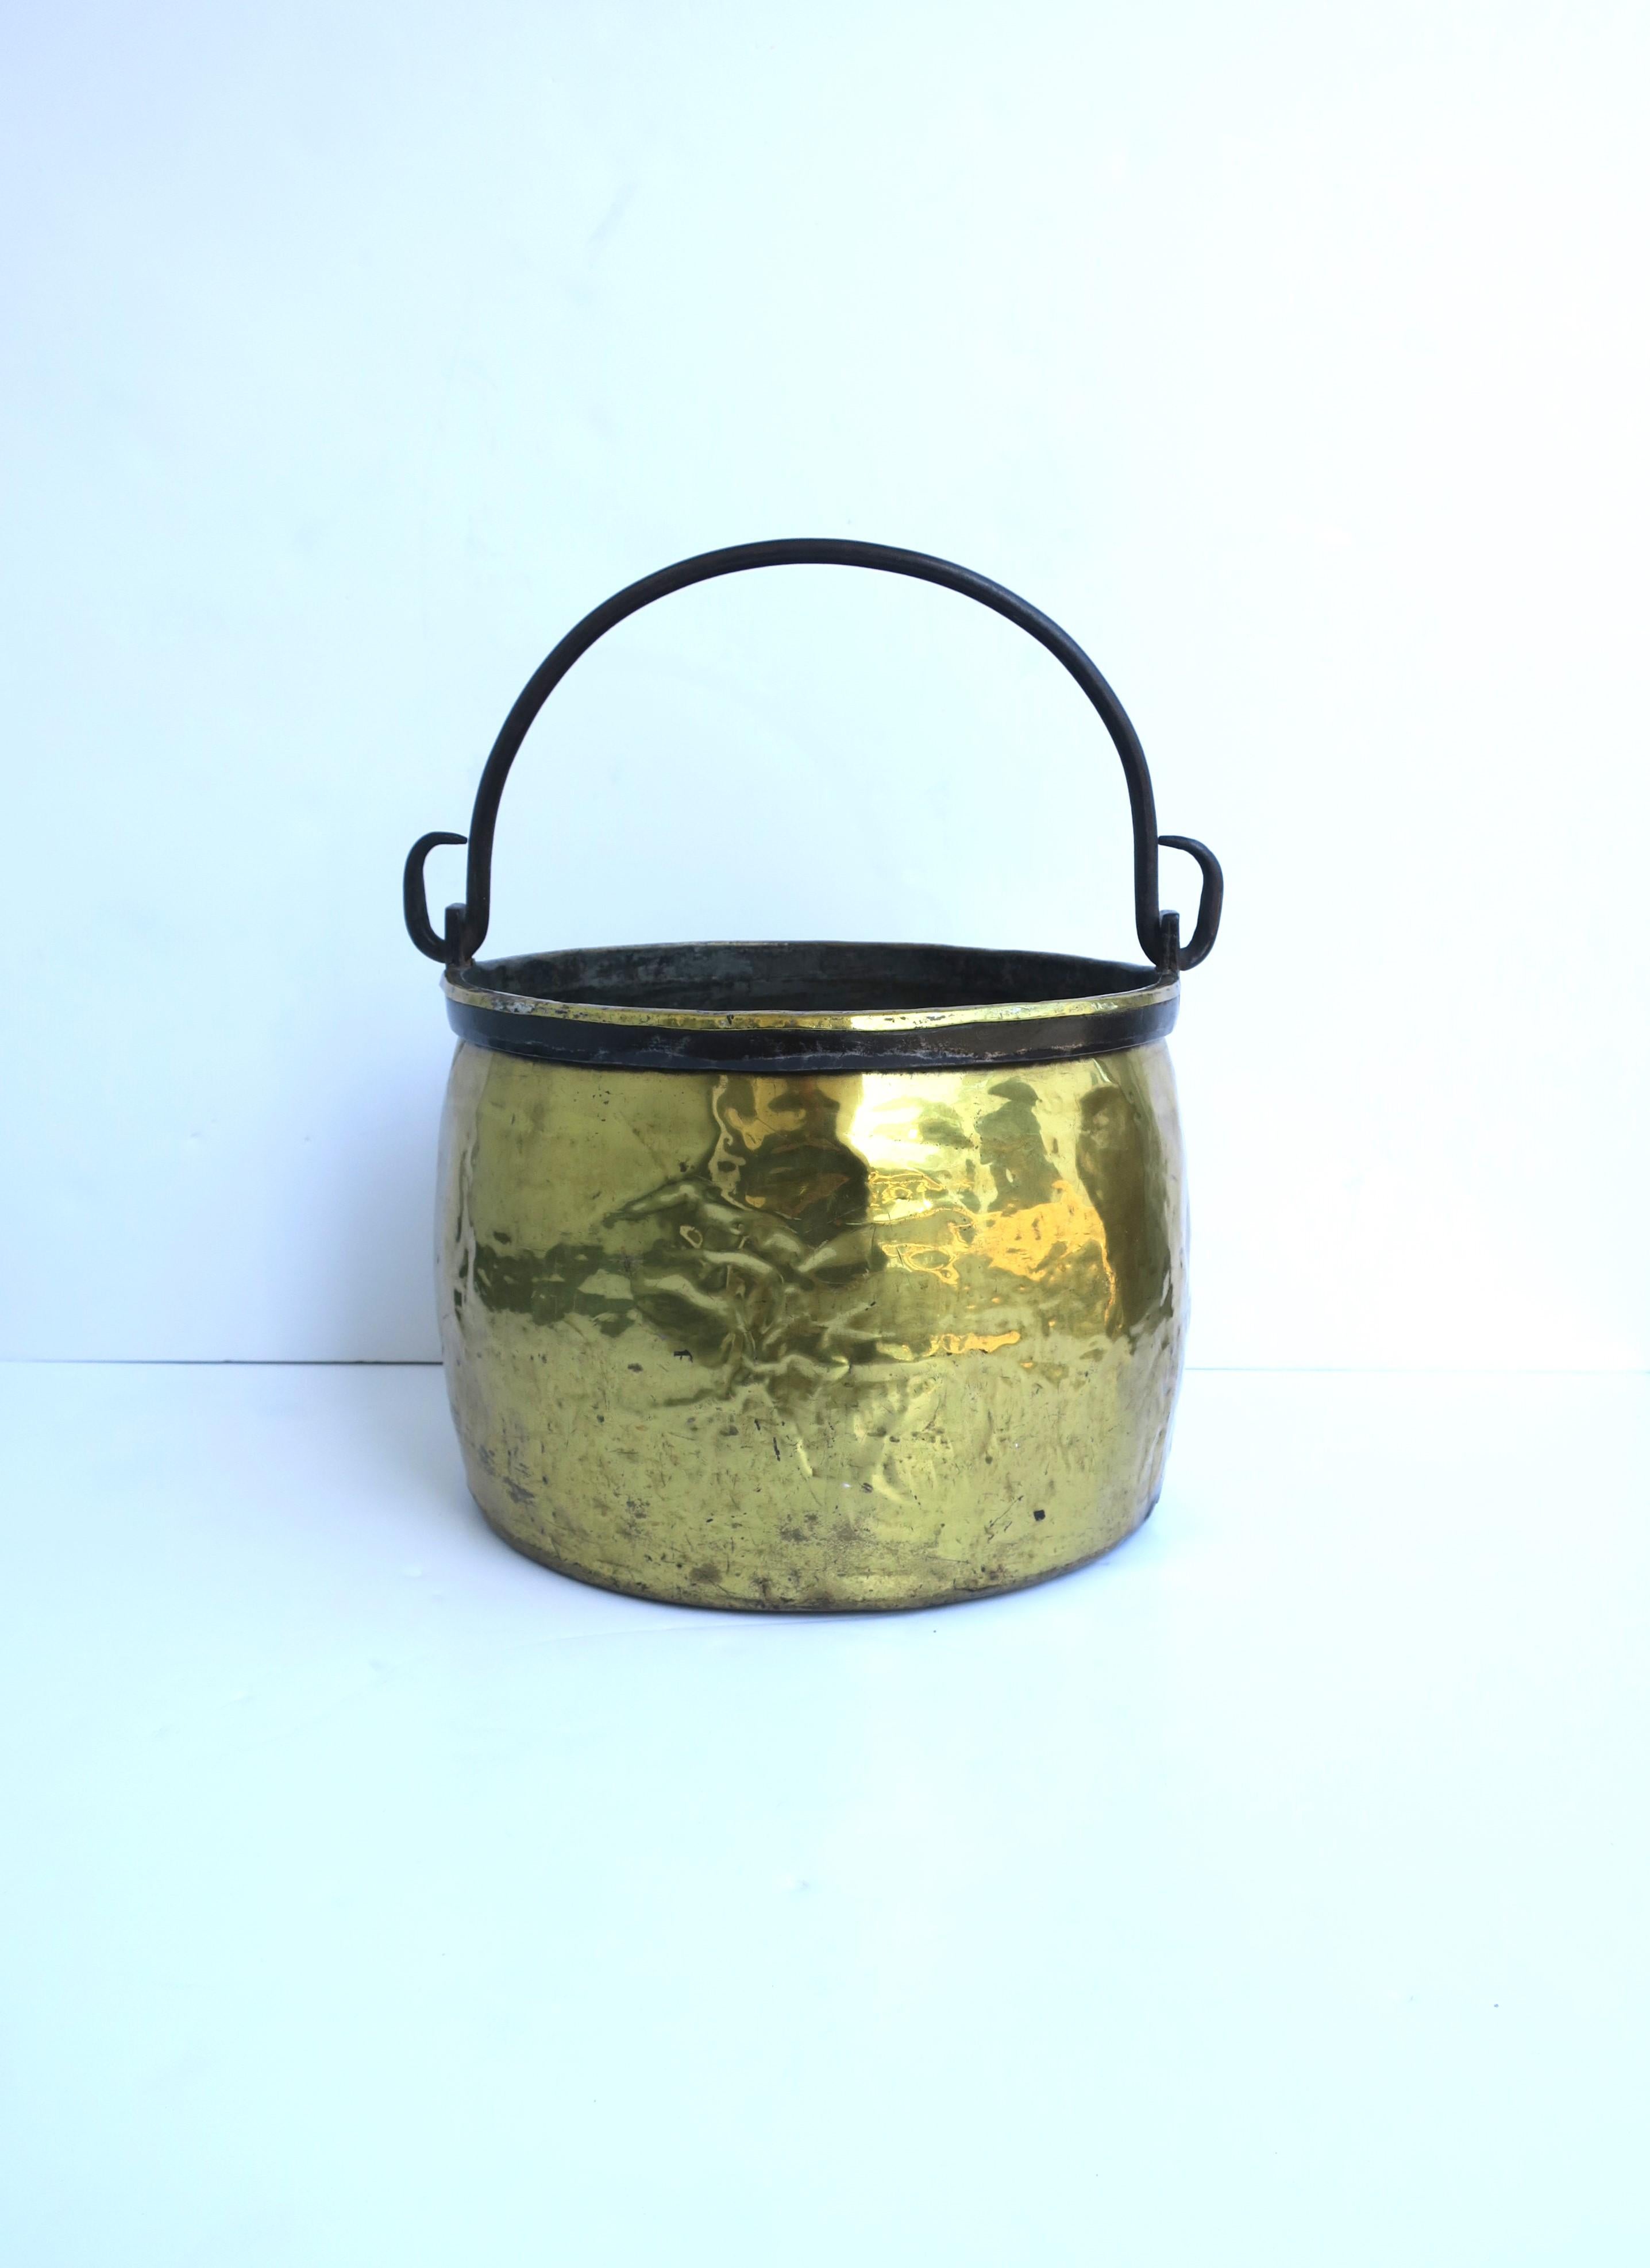 A relatively large Dutch brass fireplace bucket or pot with blacked iron handle, circa 19th century, Holland. Piece is round, brass, with a blackened iron band around top and handle to match, perfect for carrying/holding firewood (as demonstrated),